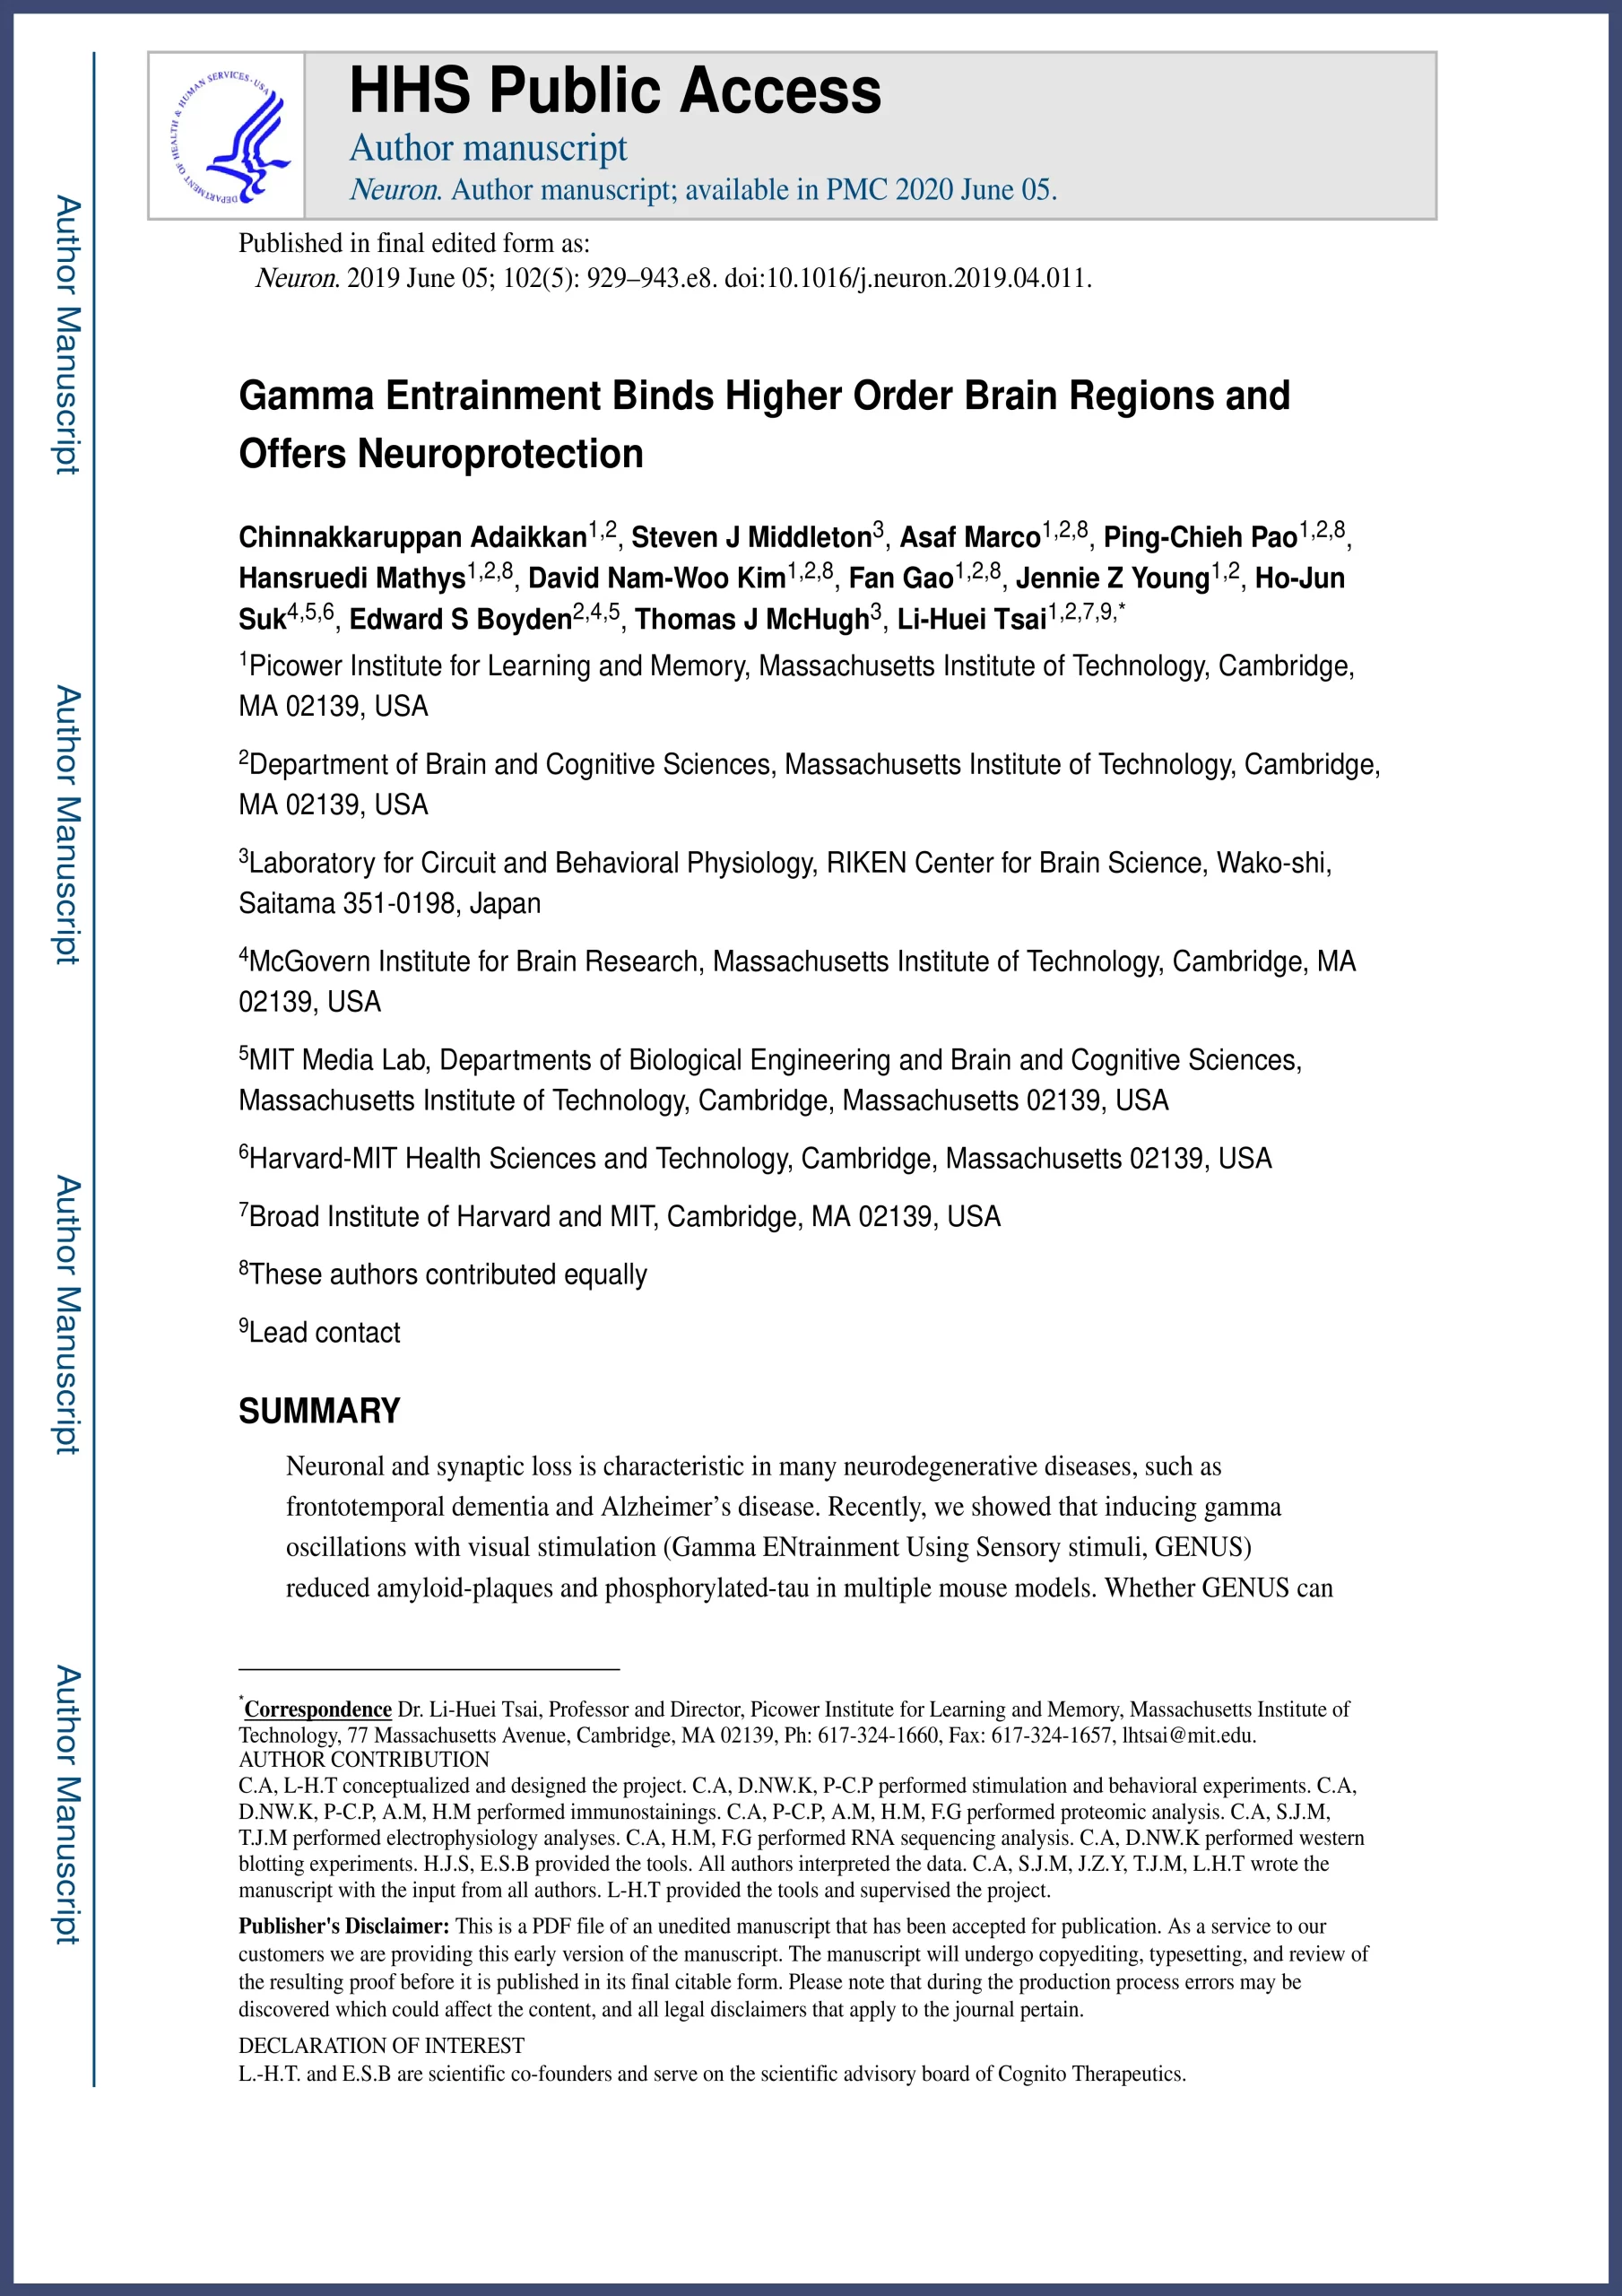 Gamma Entrainment Binds Higher Order Brain Regions and Offers Neuroprotection publication by Adaikkan 2019